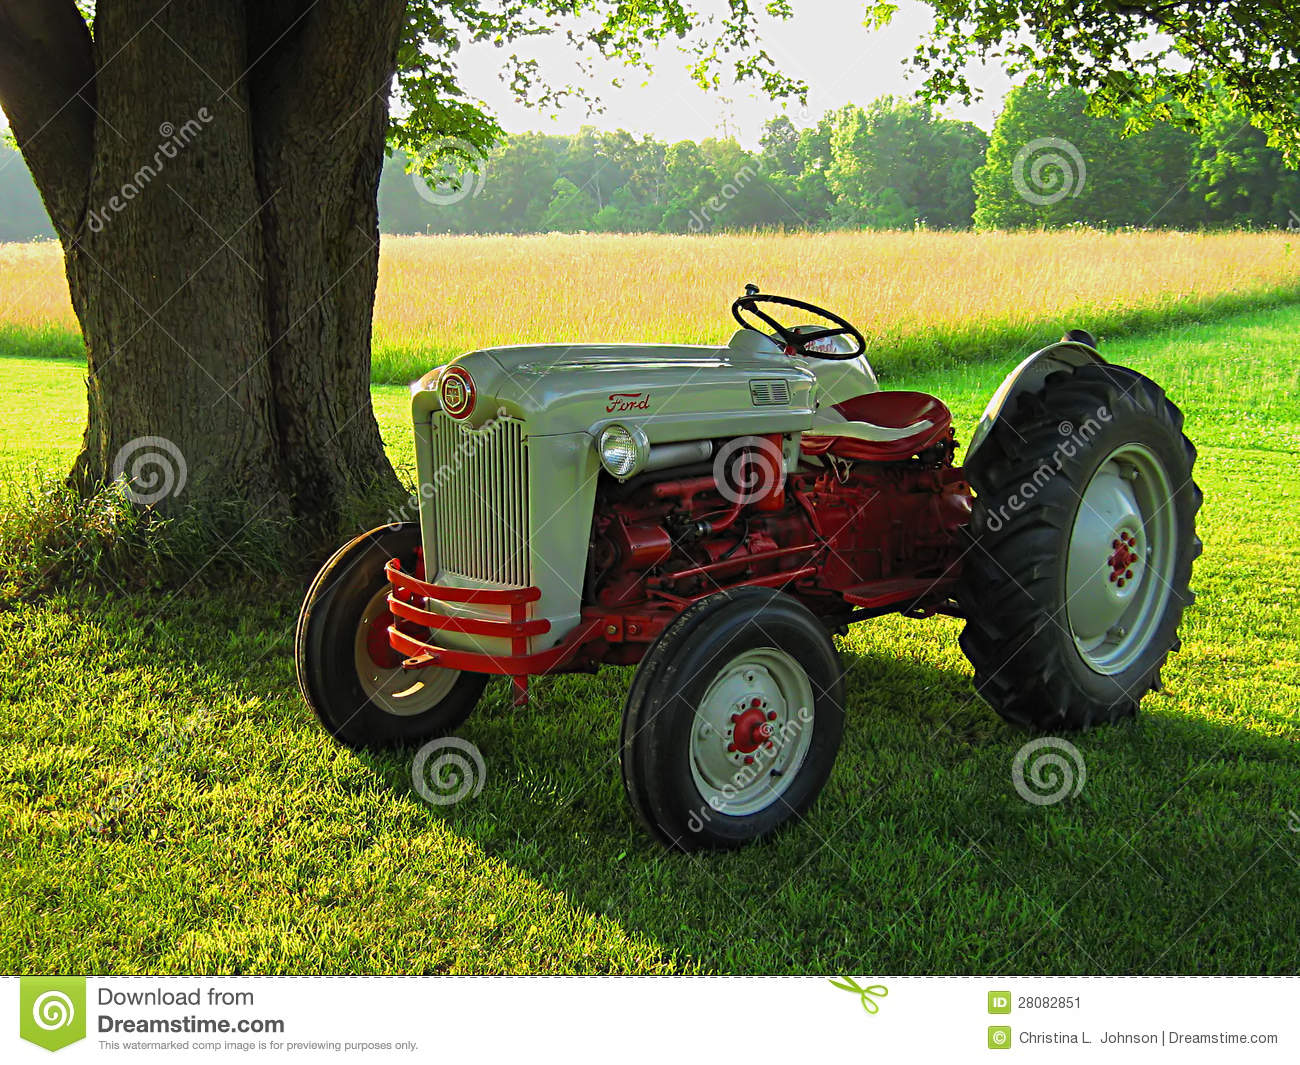 Photograph Of An Antique Tractor  This Particular Model Was    